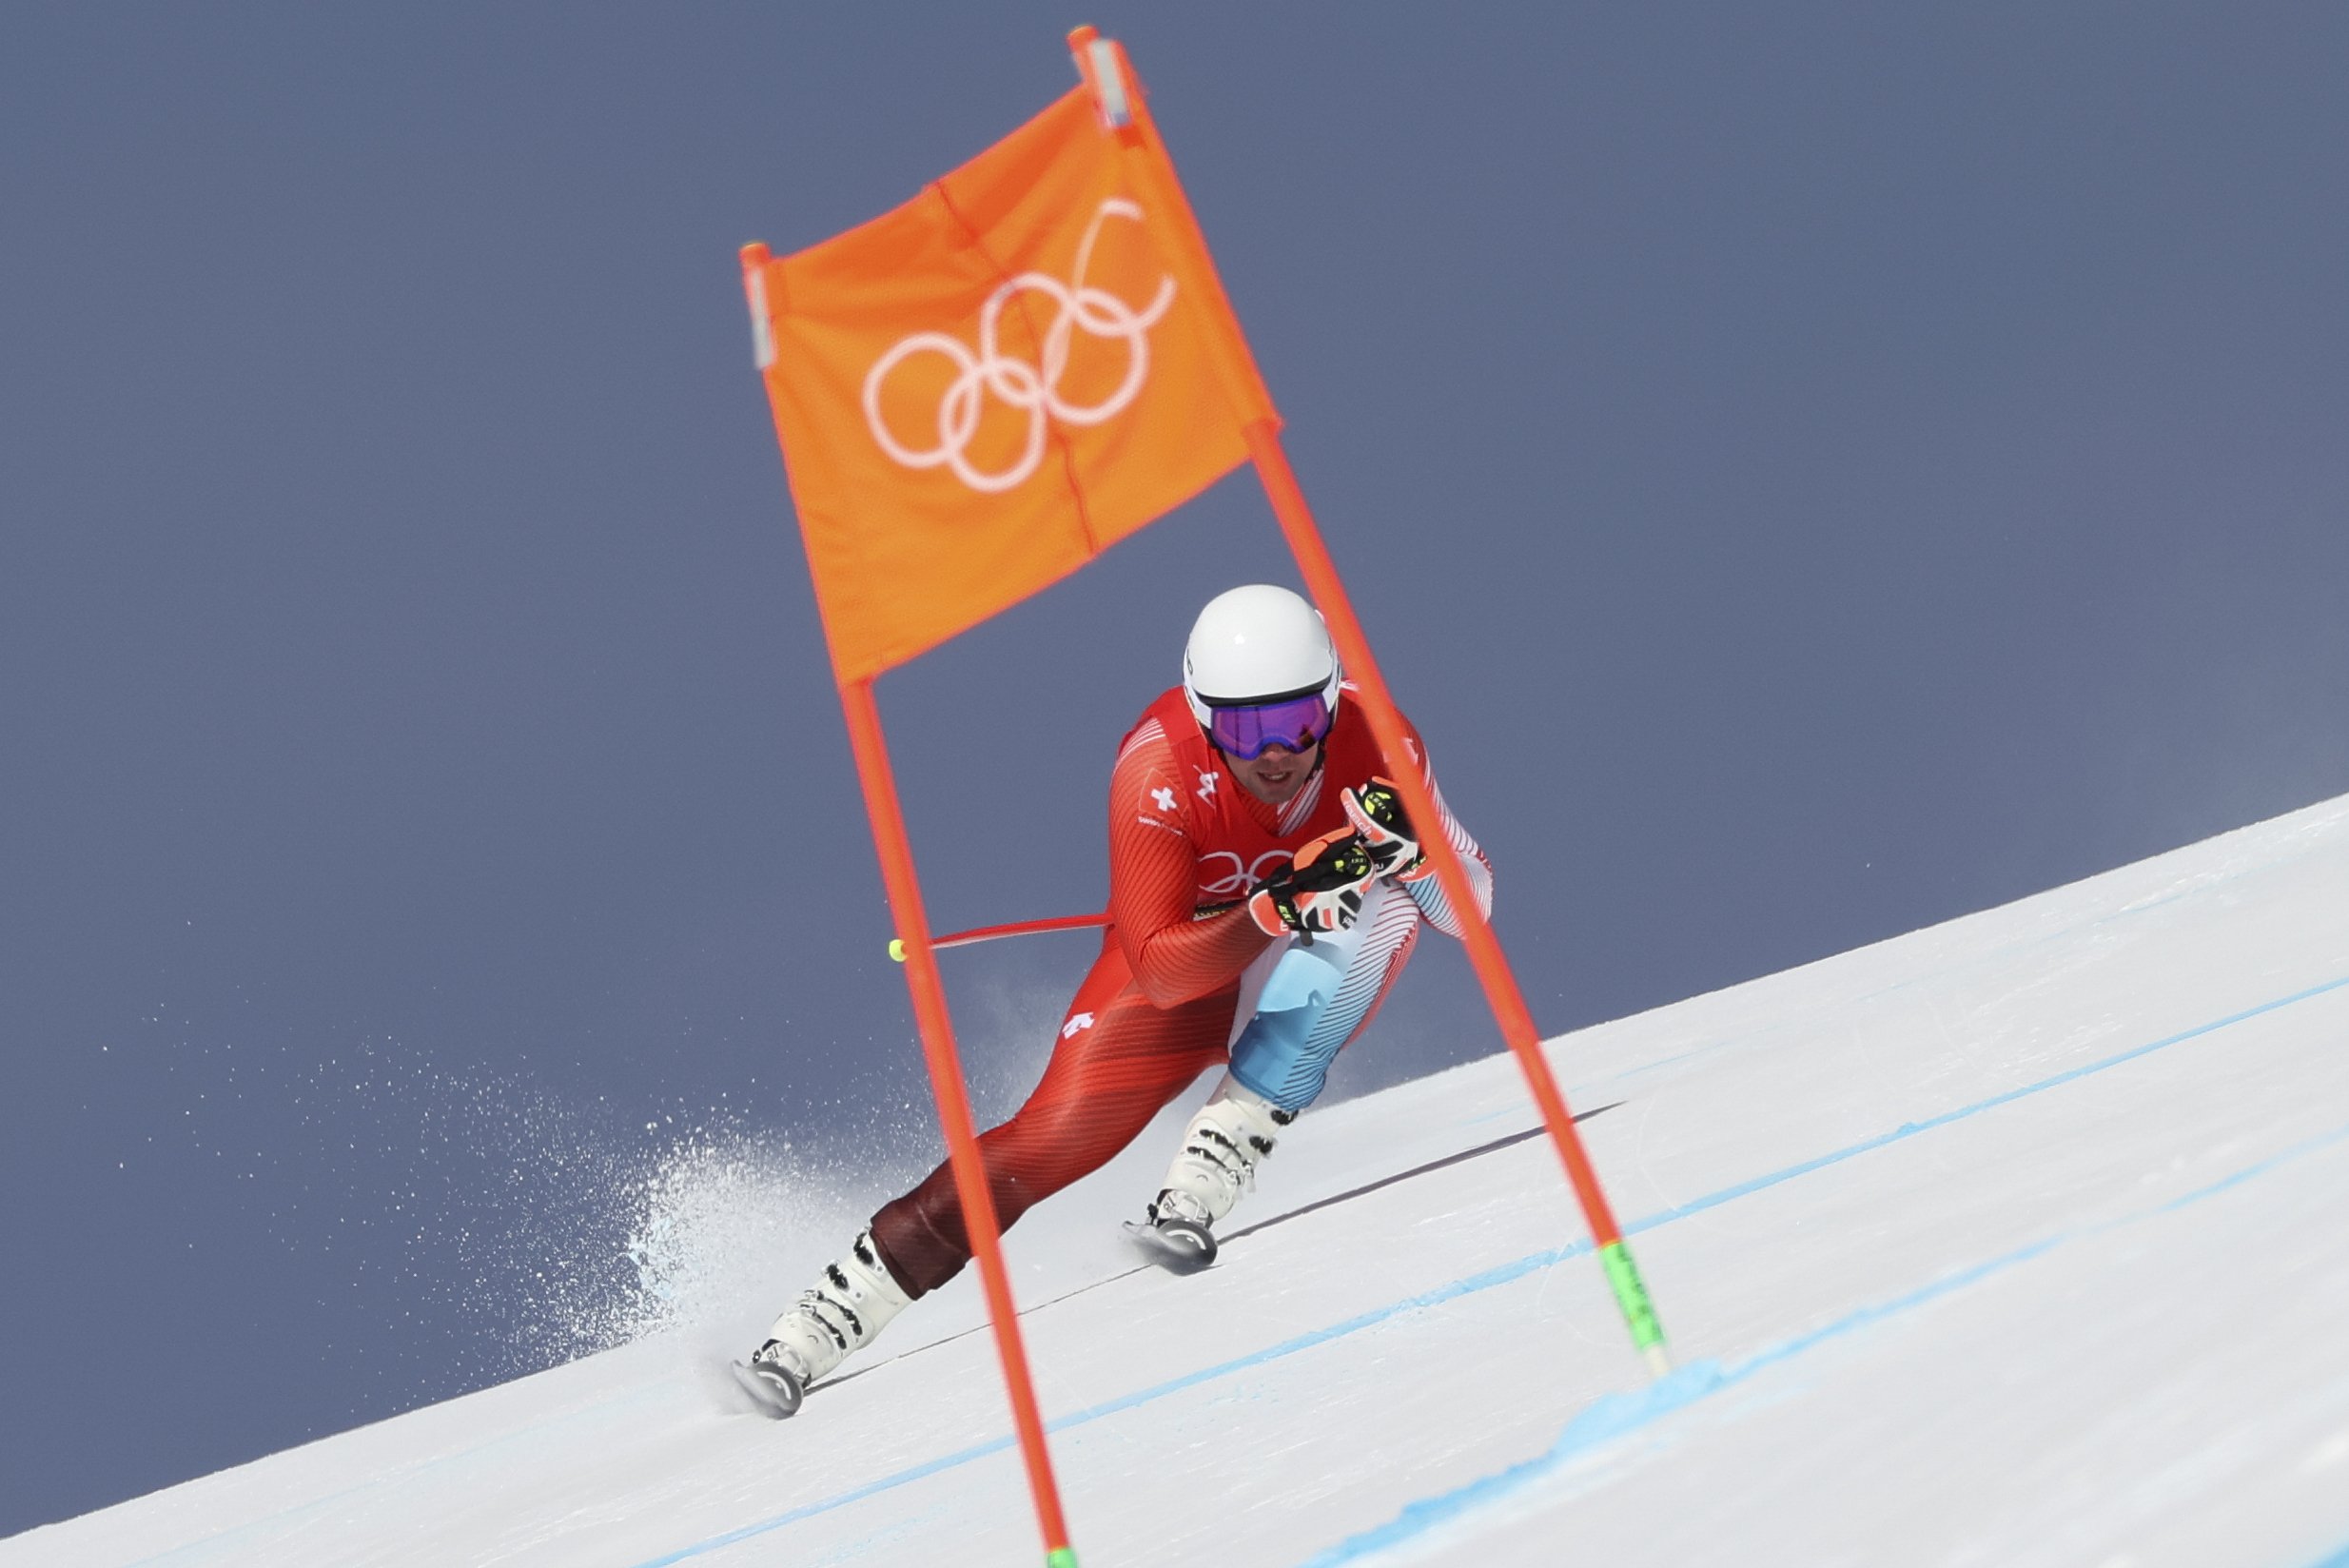  Beat Feuz, of Switzerland, makes a turn in the men's downhill at the 2022 Winter Olympics, Monday, Feb. 7, 2022, in the Yanqing district of Beijing. (AP Photo/Alessandro Trovati) 